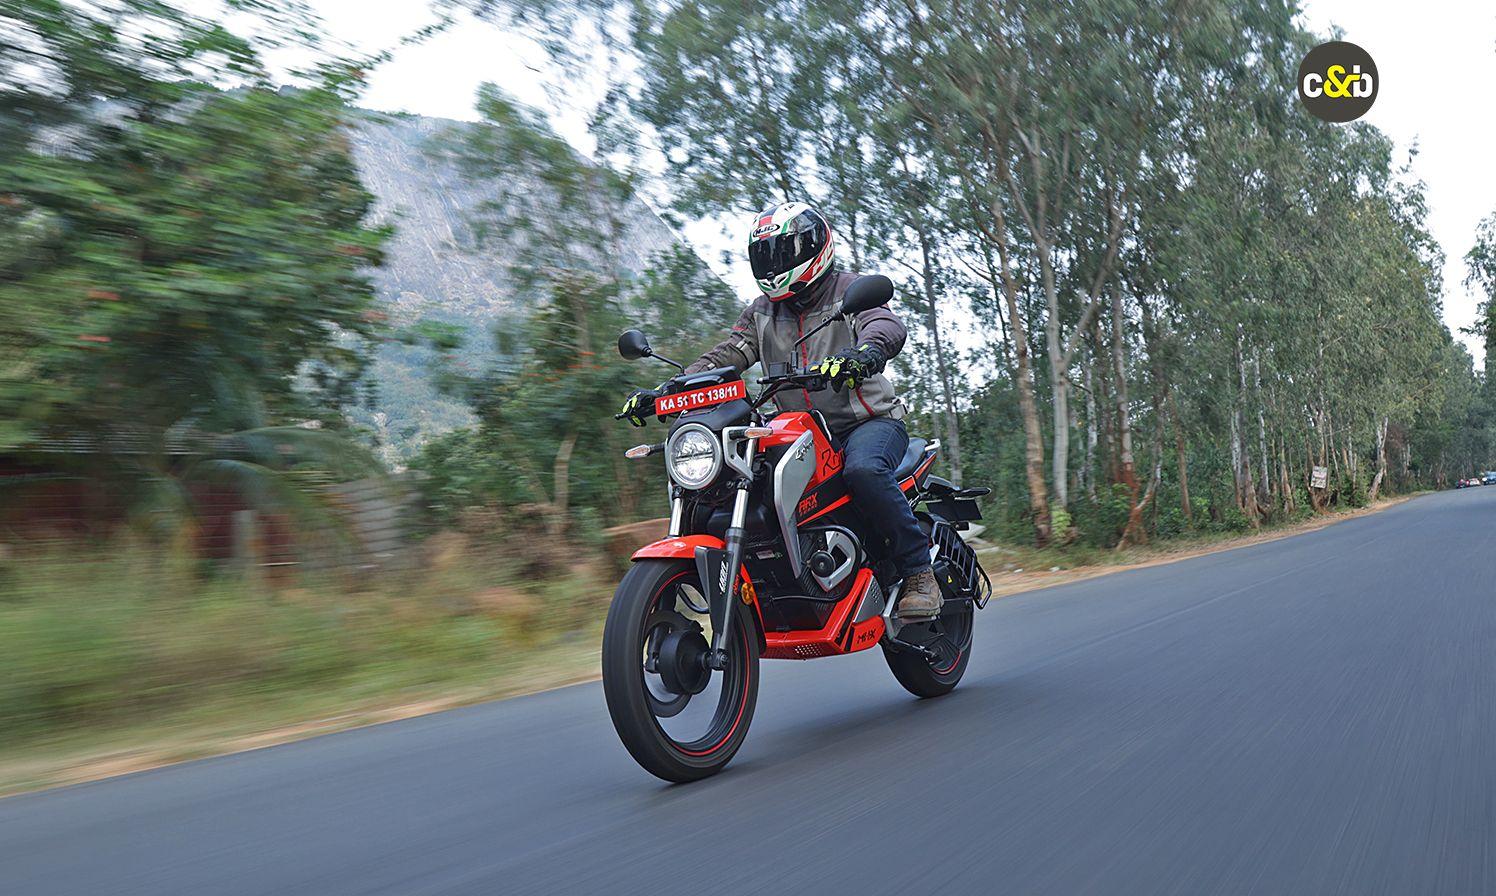 We test ride the 2023 Oben Rorr e-motorcycle that aims to take on the 150cc motorcycle segment. Here’s what we have to say about it